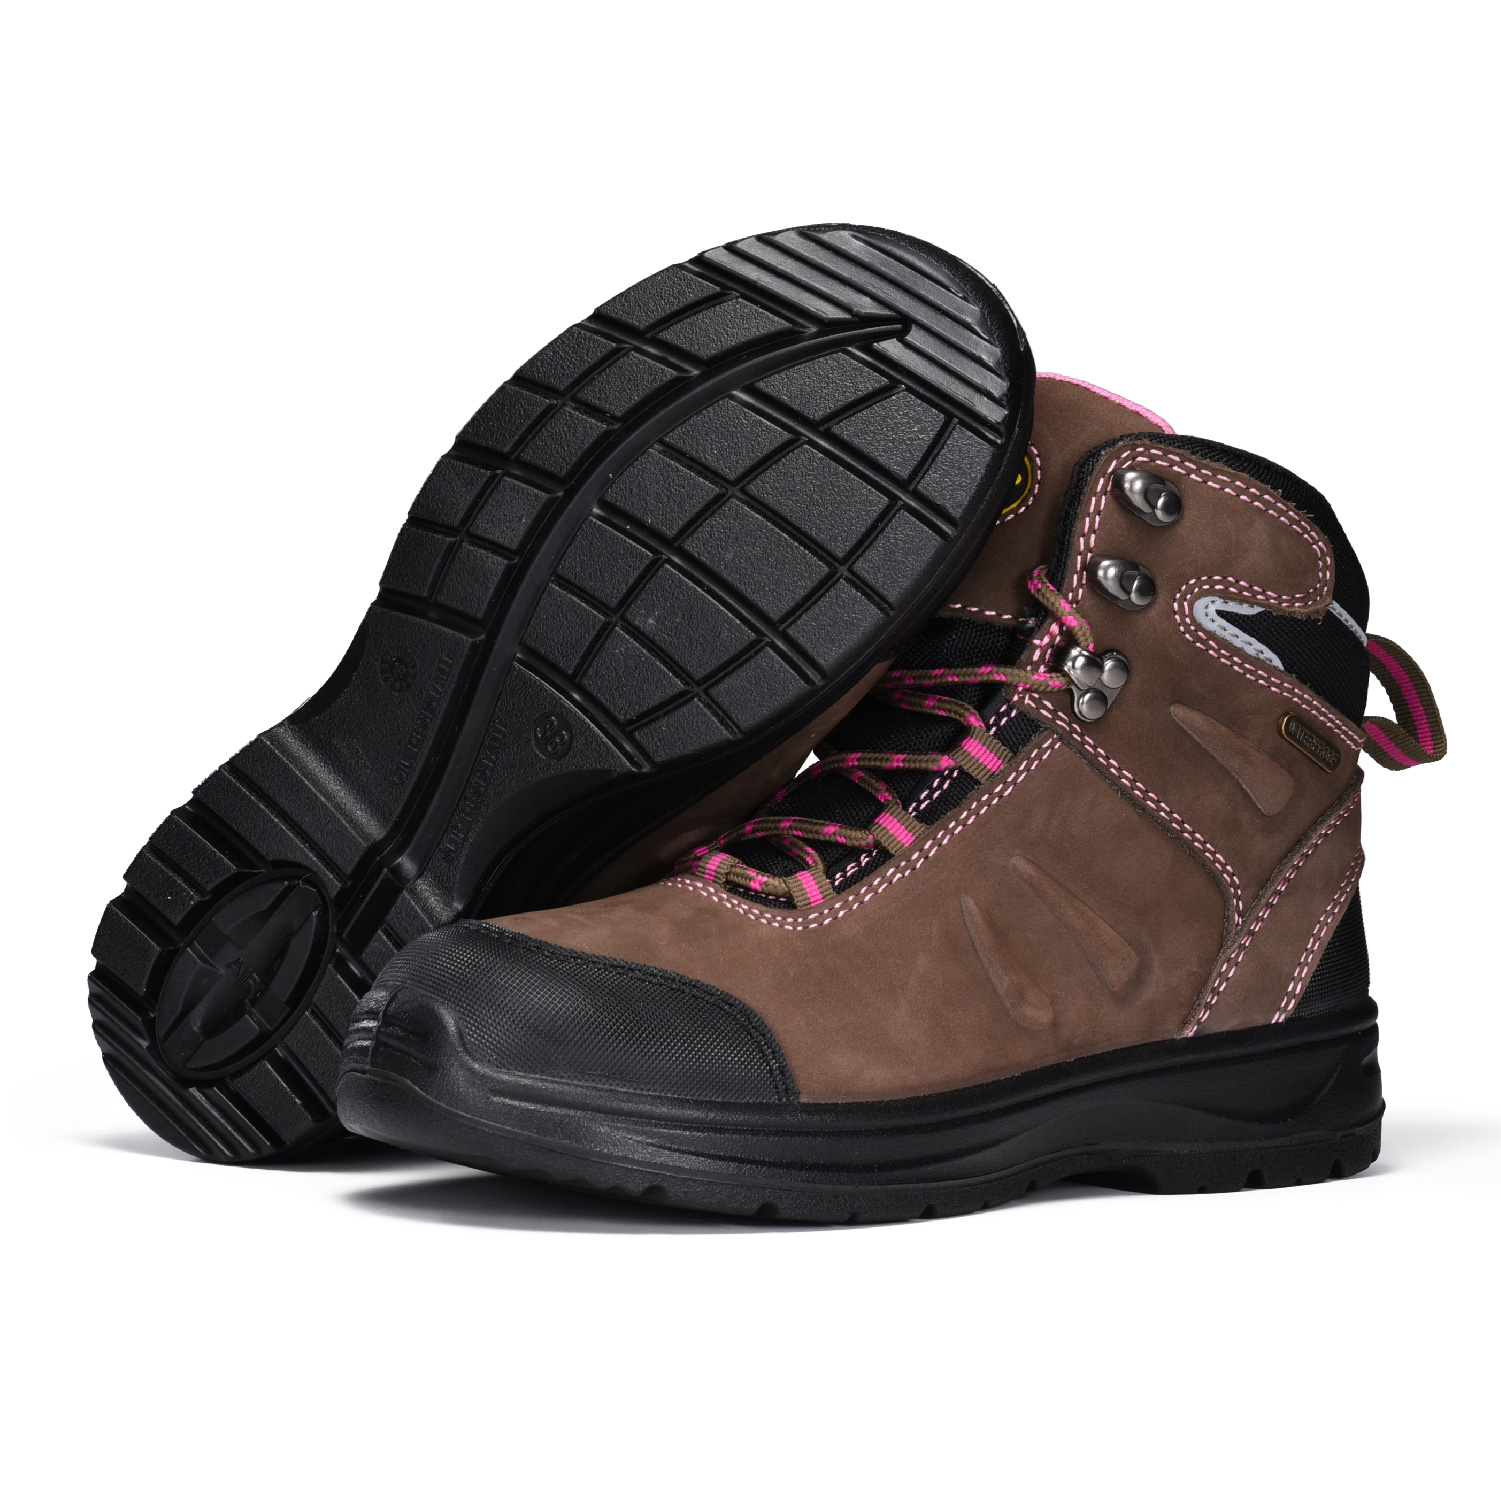 Waterproof Membrane Lady Safety Work Boots M-8553 new